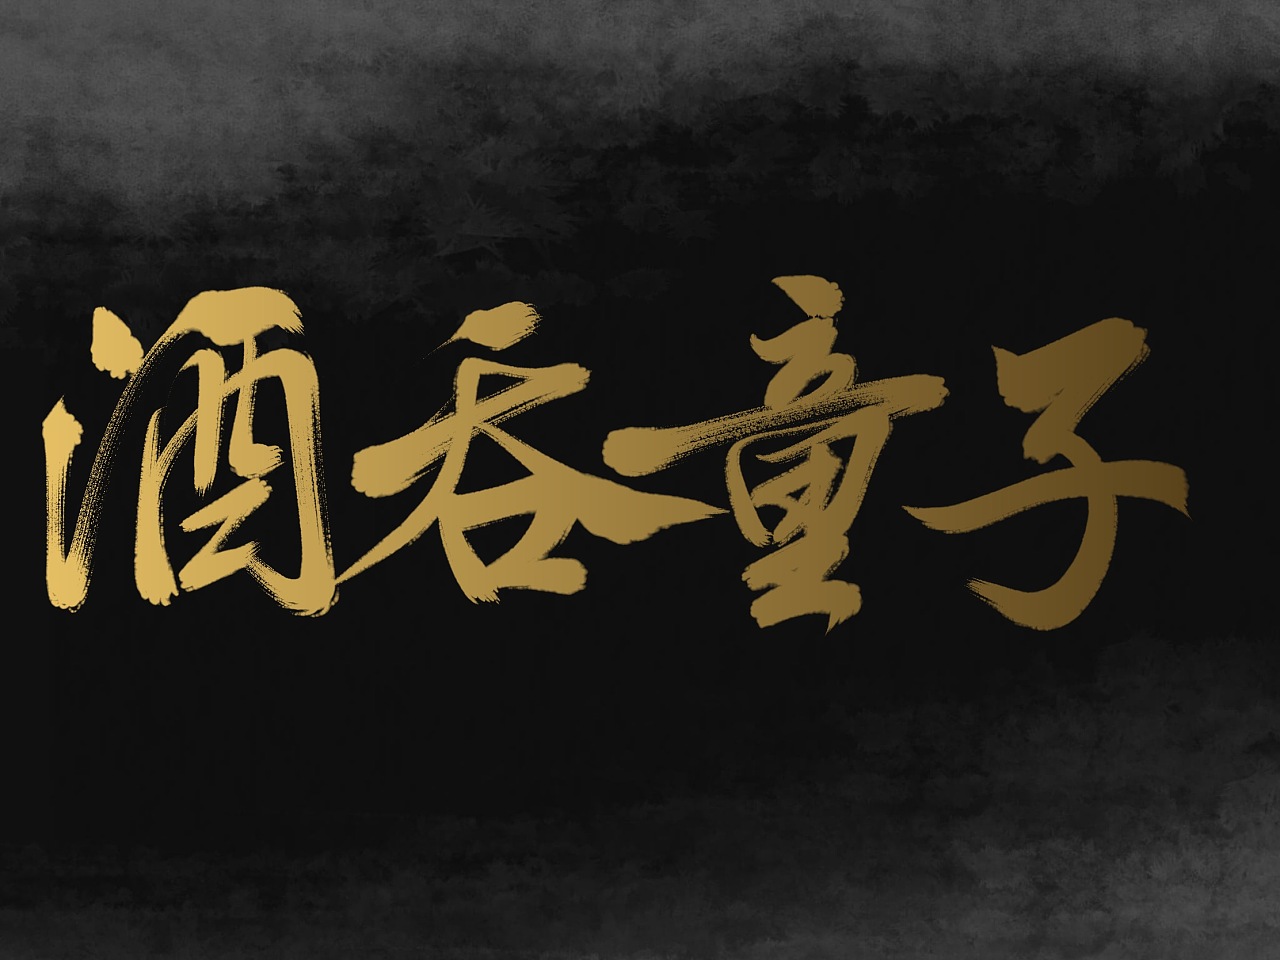 Chinese Creative Font Design-the calm before the storm